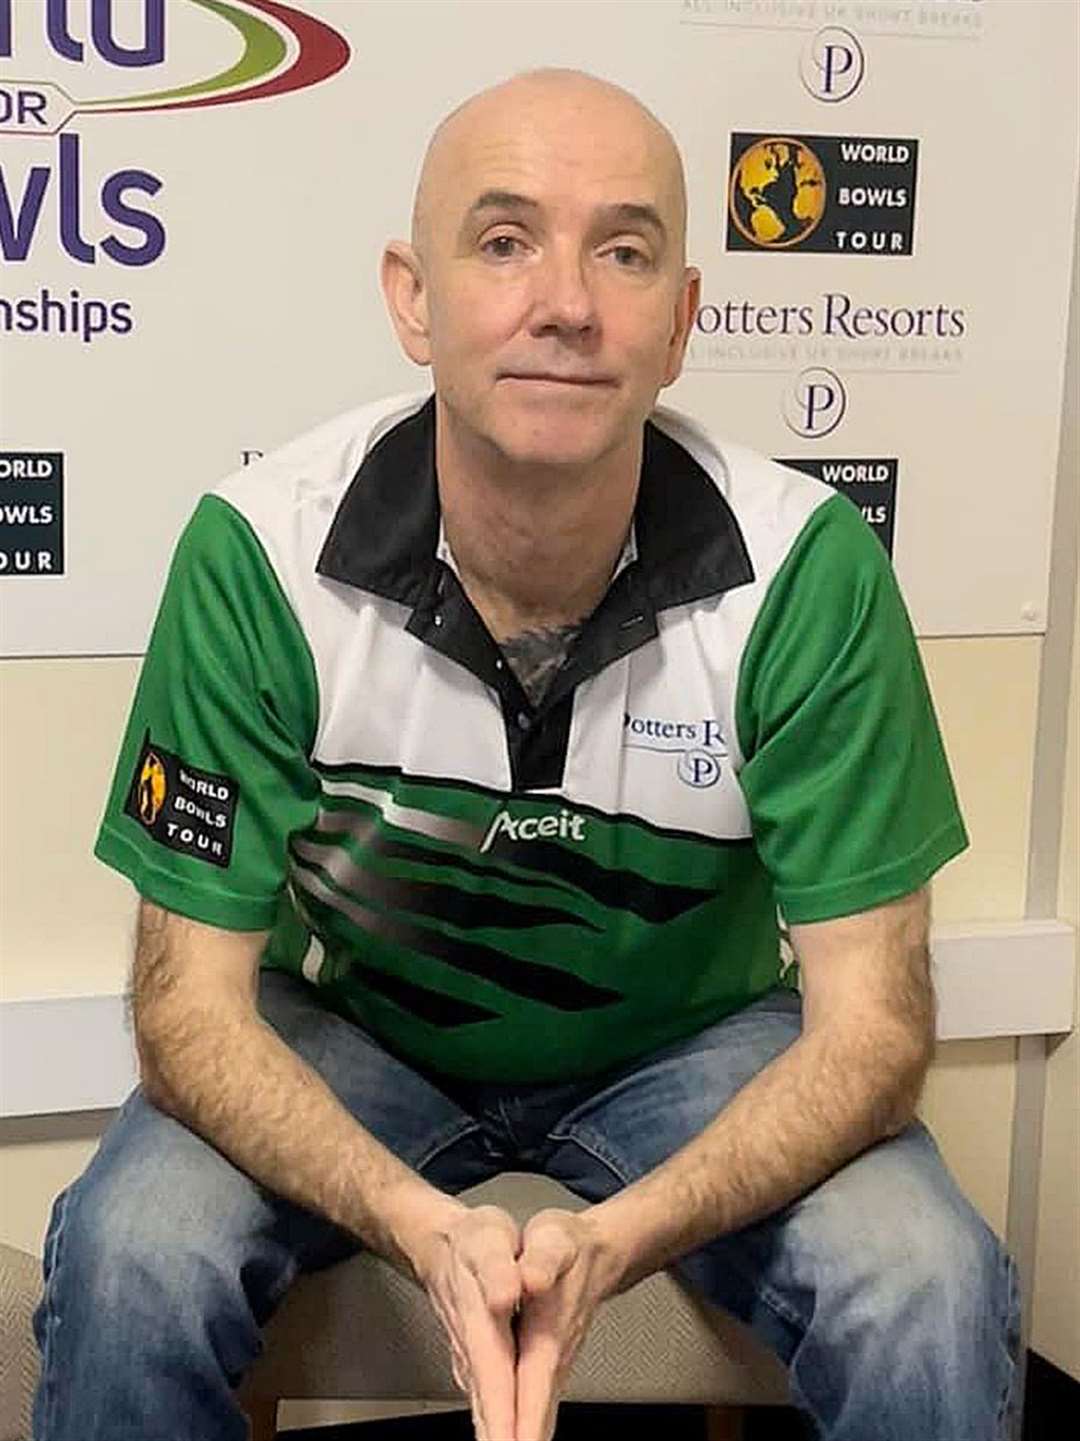 Ashford Indoor Bowls Club's Pat Briscoe was too good for 1996 World Indoor Bowls champion David Gourlay, winning 10-2, 8-5. Picture: World Bowls Tour